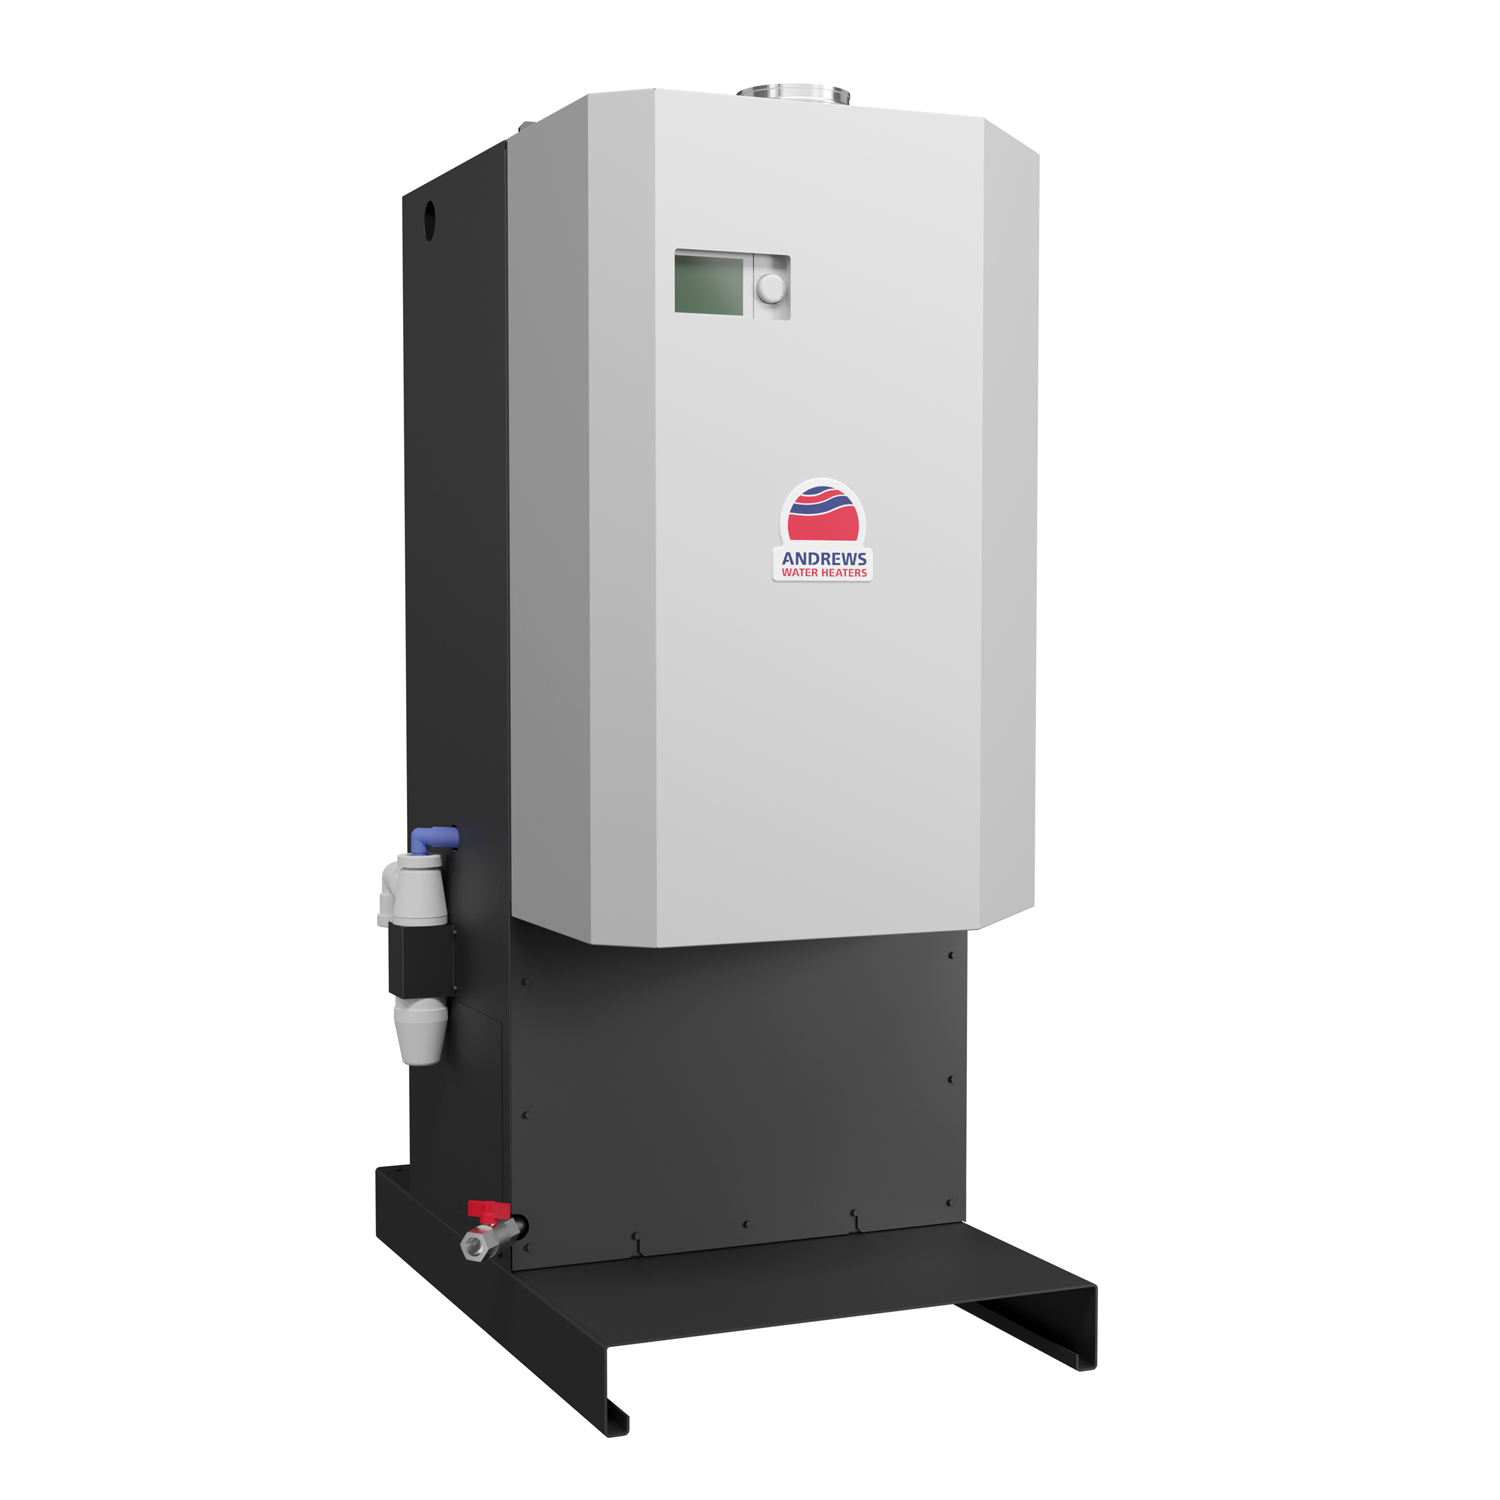 Power and precision: Andrews Water Heaters expands its MAXXflo EVO condensing water heater range